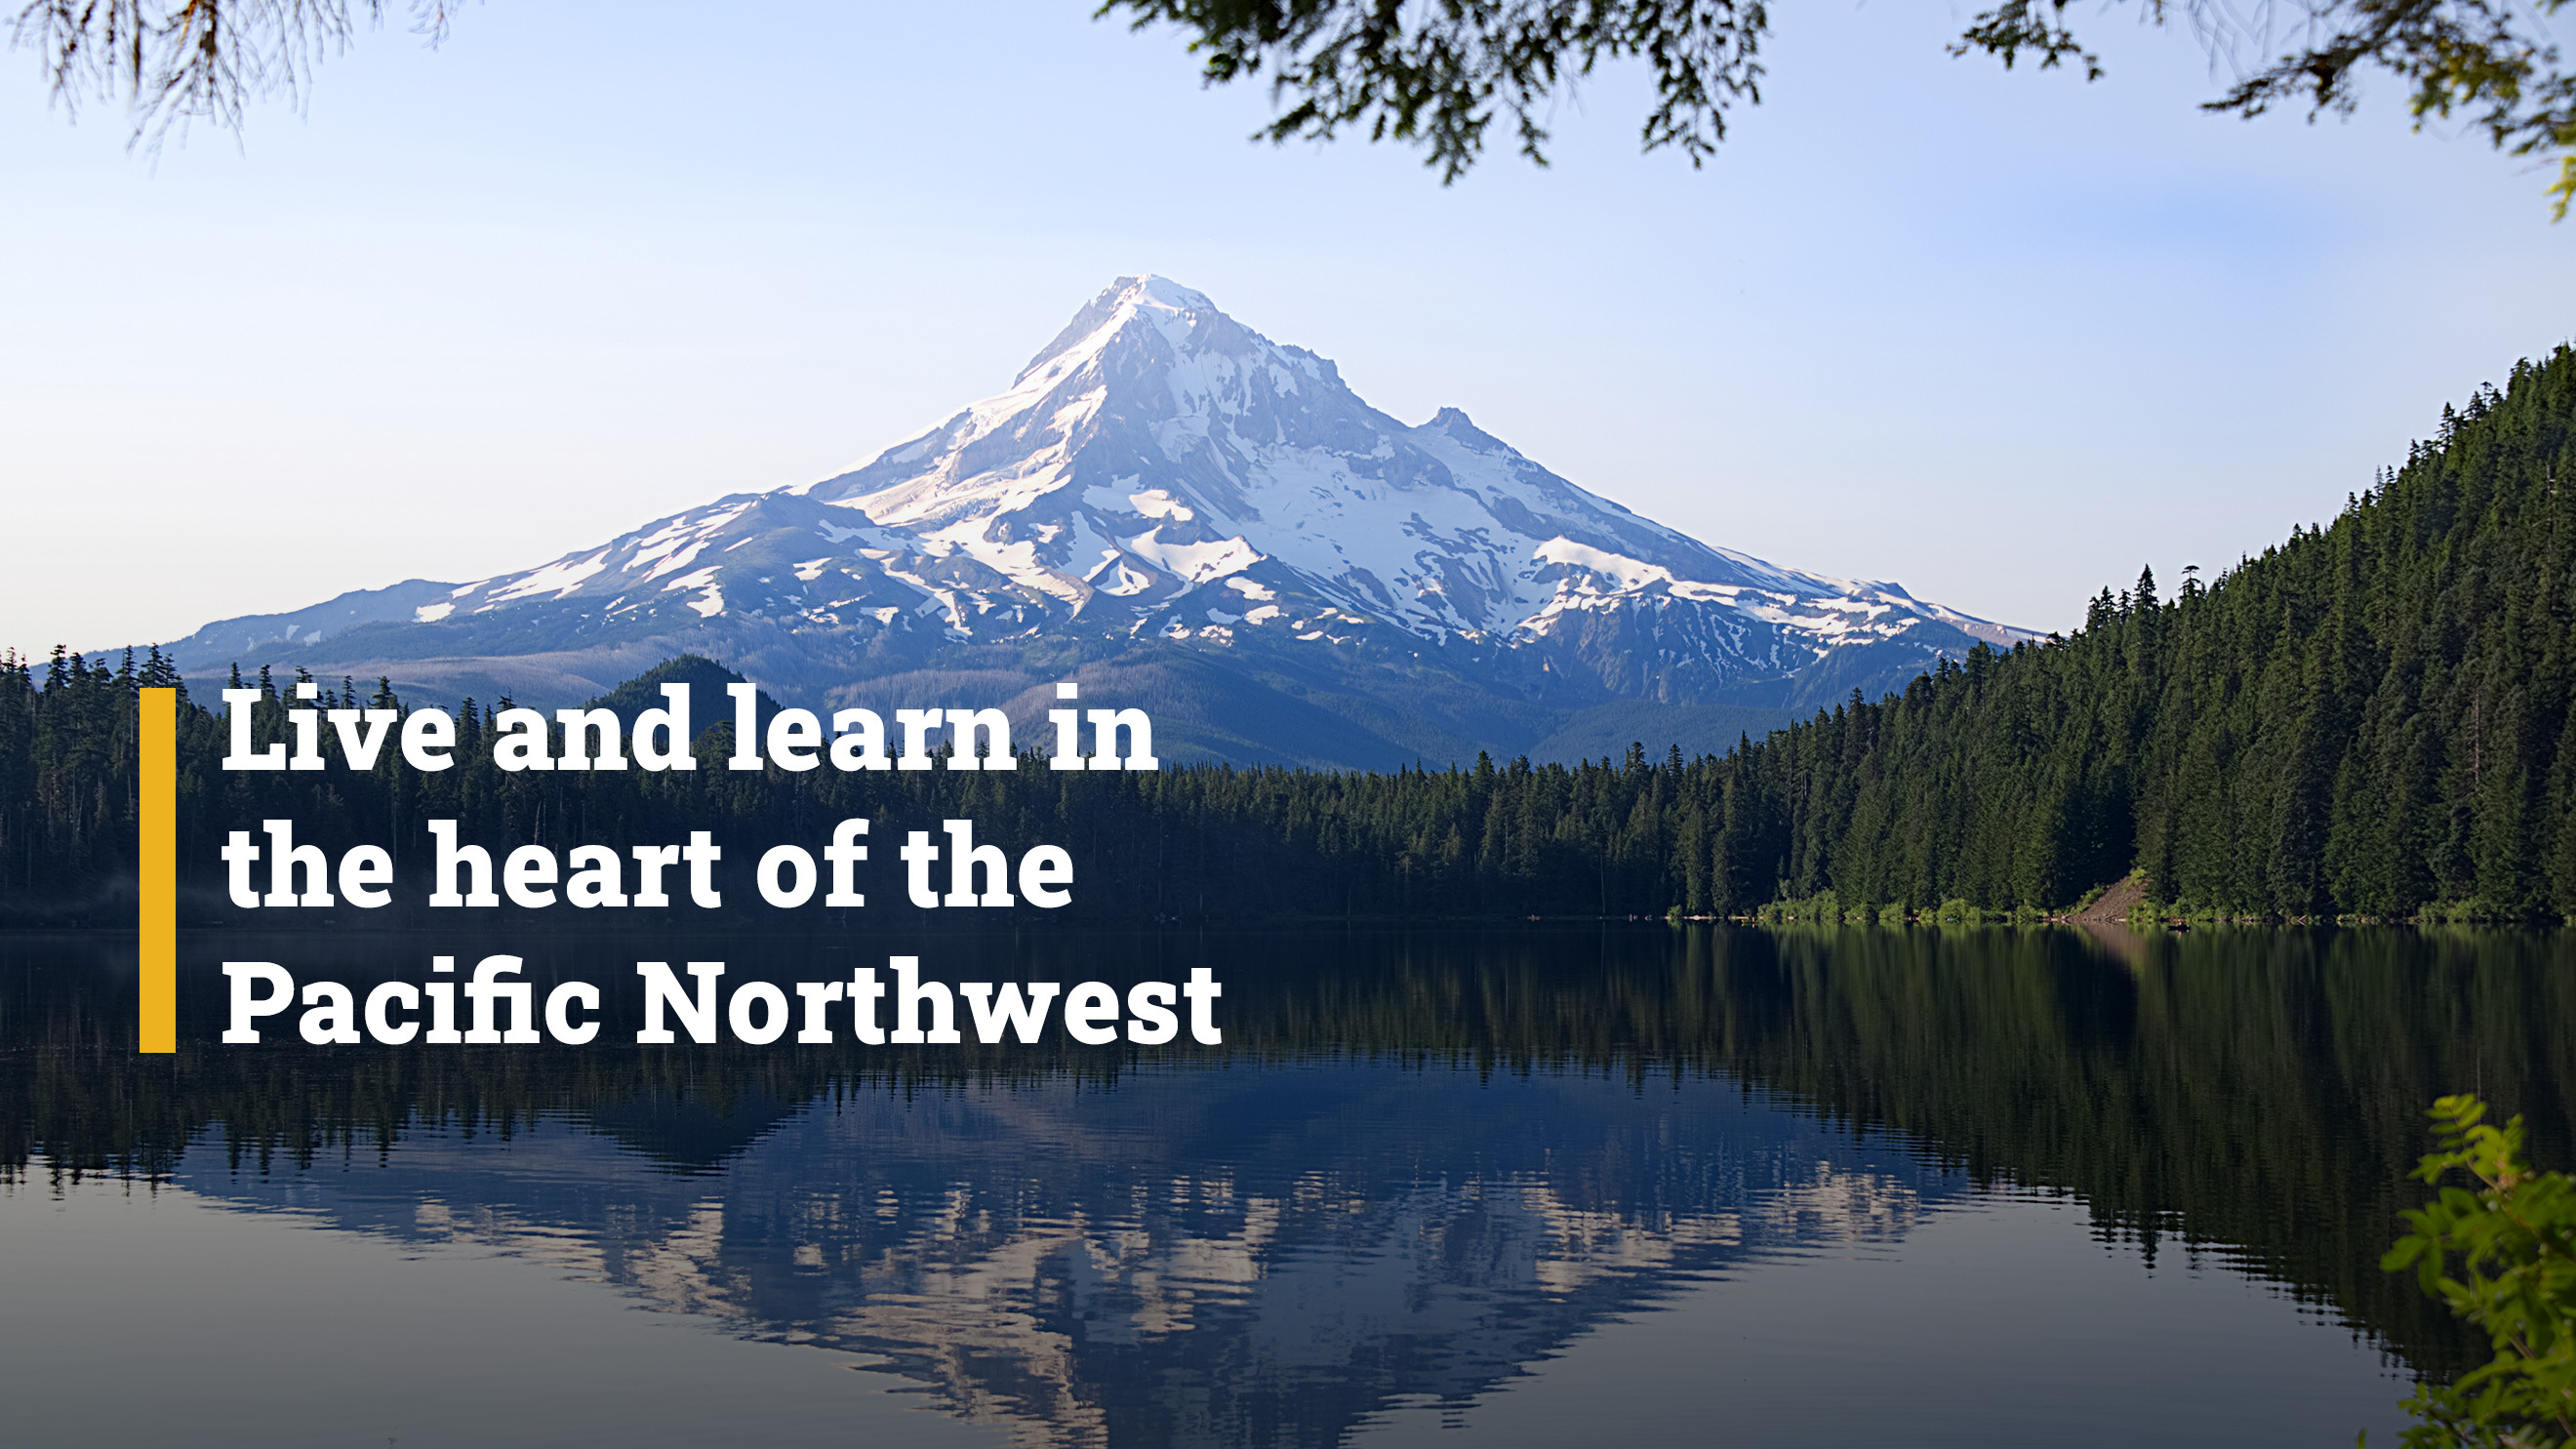 Live and learn in the heart of the Pacific Northwest